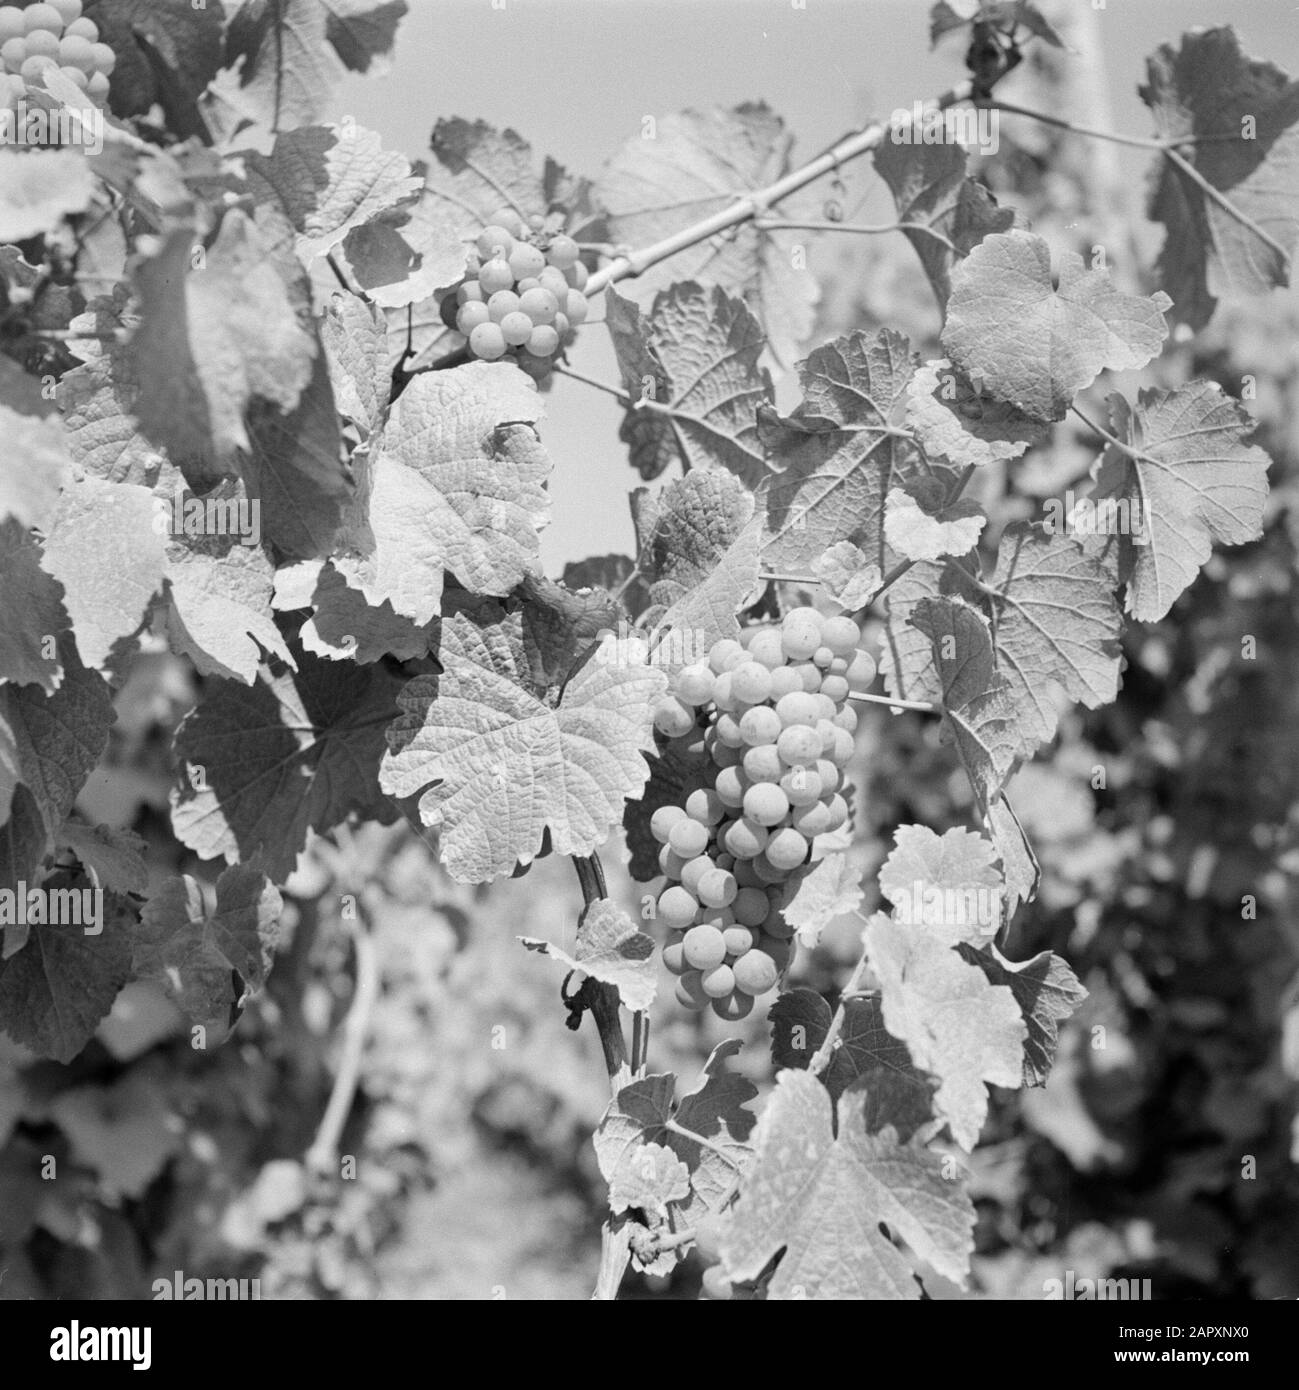 Moselle: Viticulture  Bunches with presumably Riesling grapes Date: 1959 Location: Germany, Rhineland-Palatinate, Wehlen, West Germany Keywords: grapes, viticulture Stock Photo